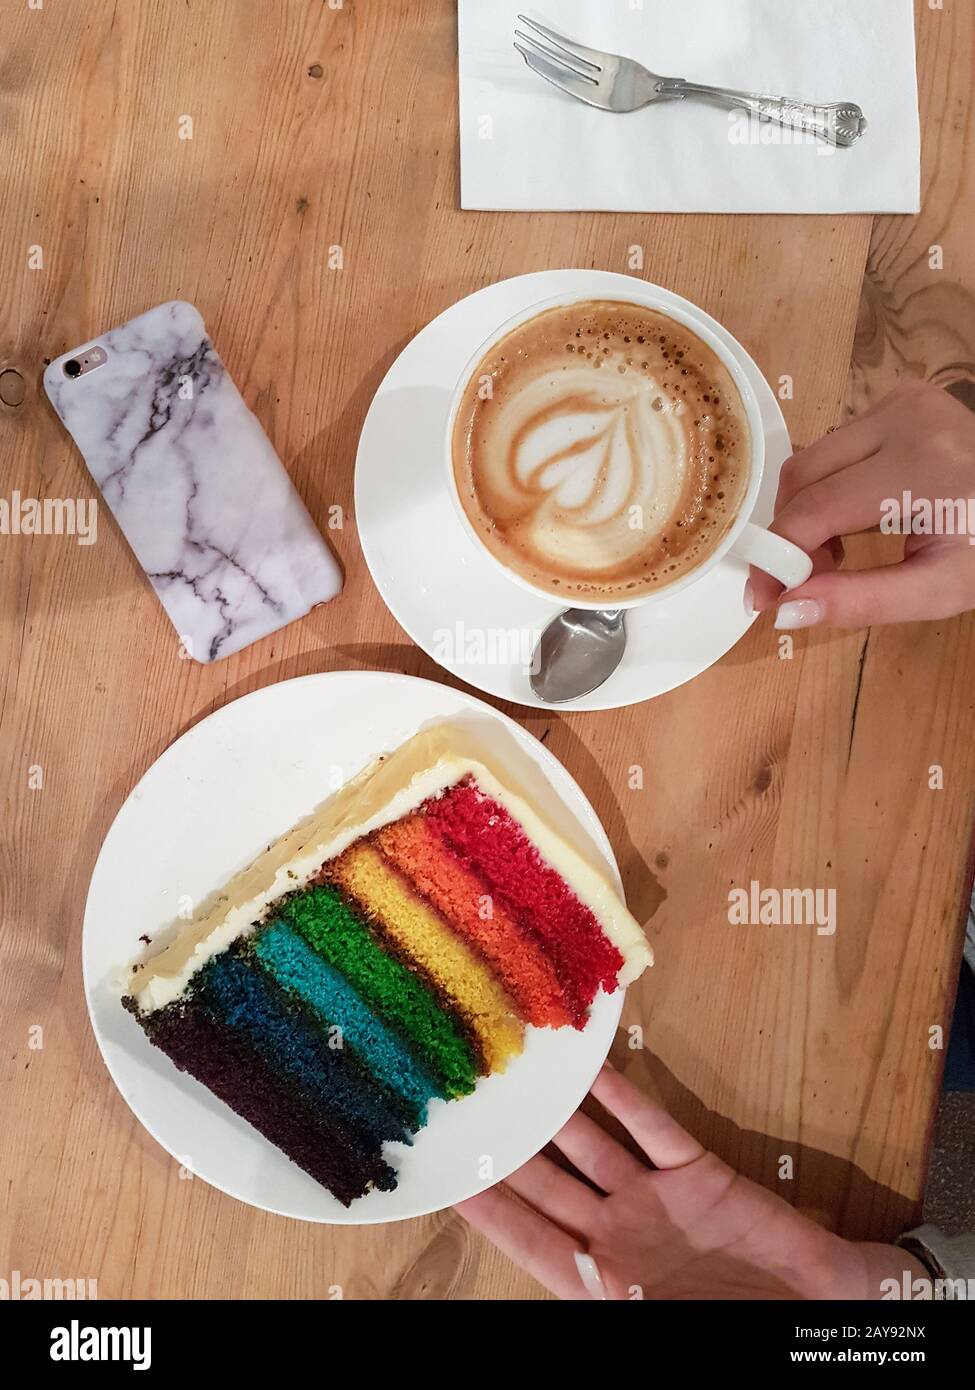 Female hand holding coffee cup and cake plate Stock Photo